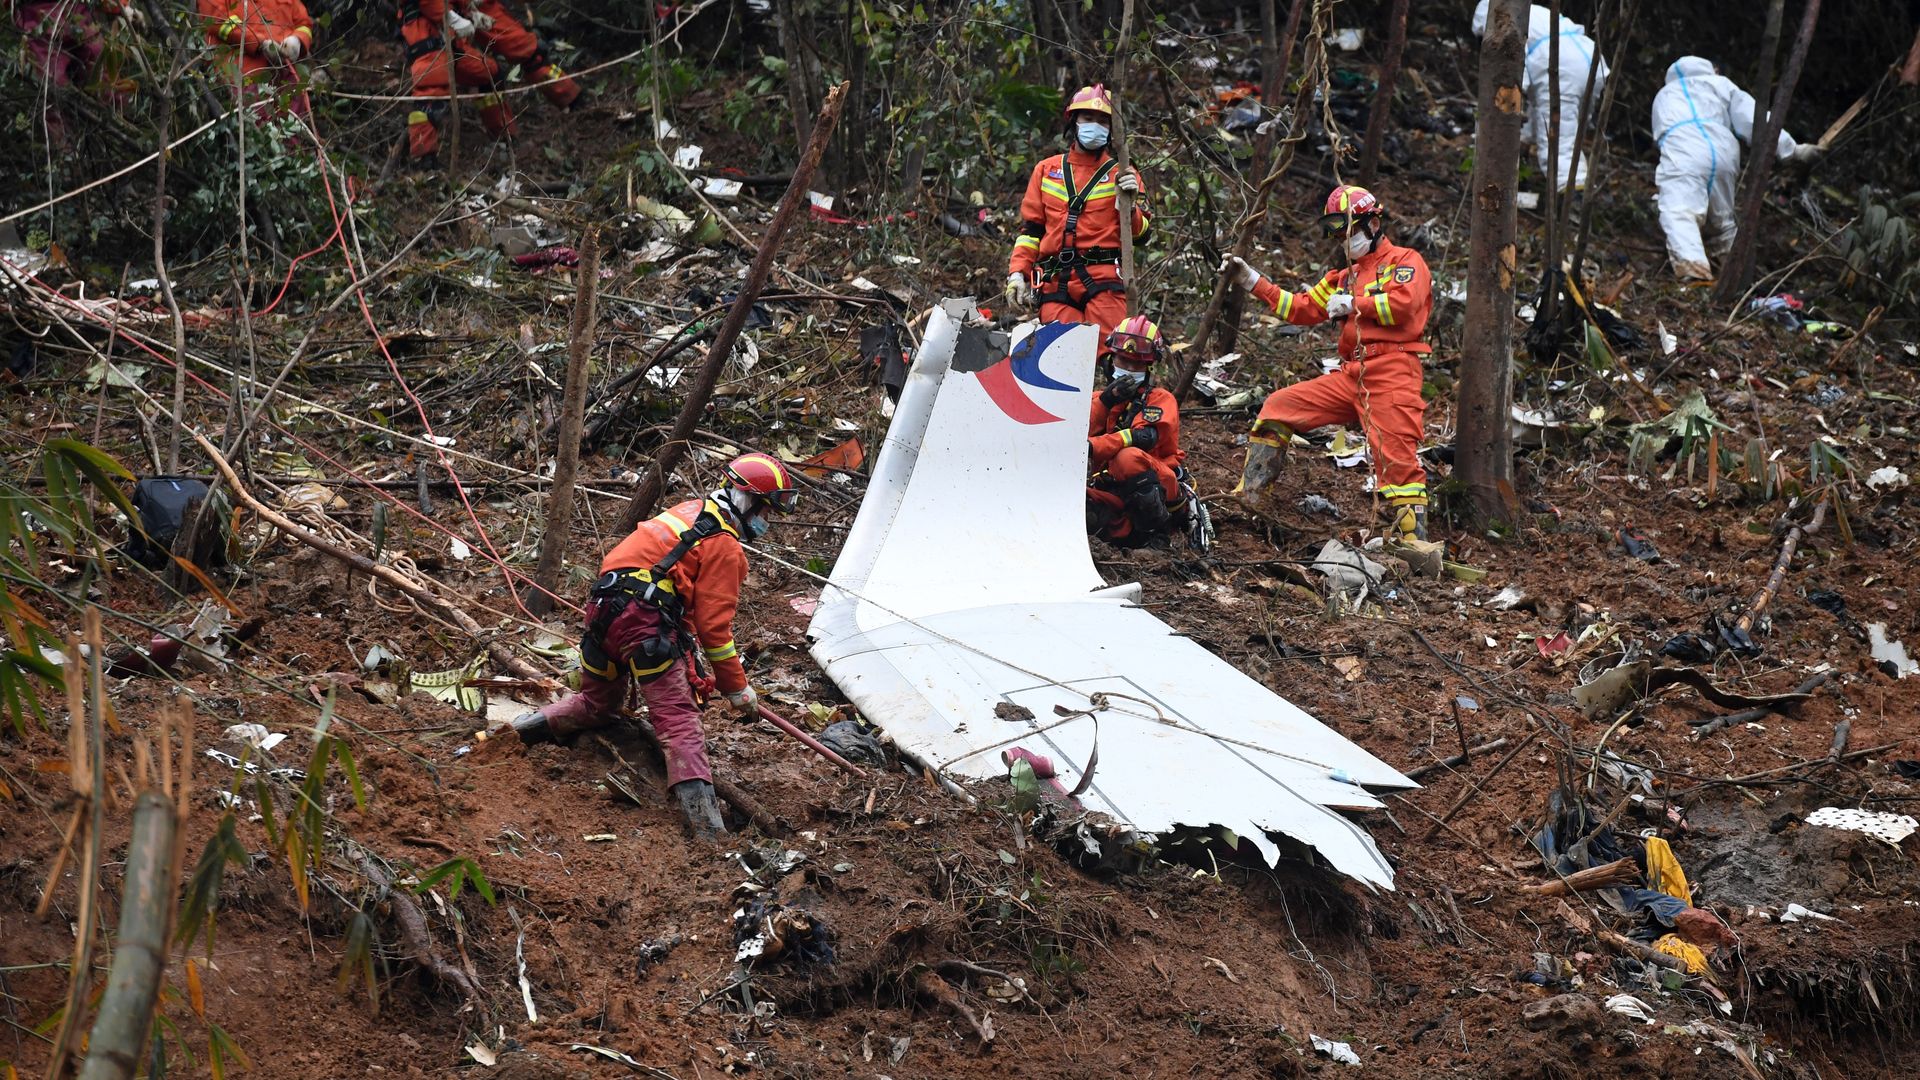 Rescuers search for remains in plane crash wreckage in China.